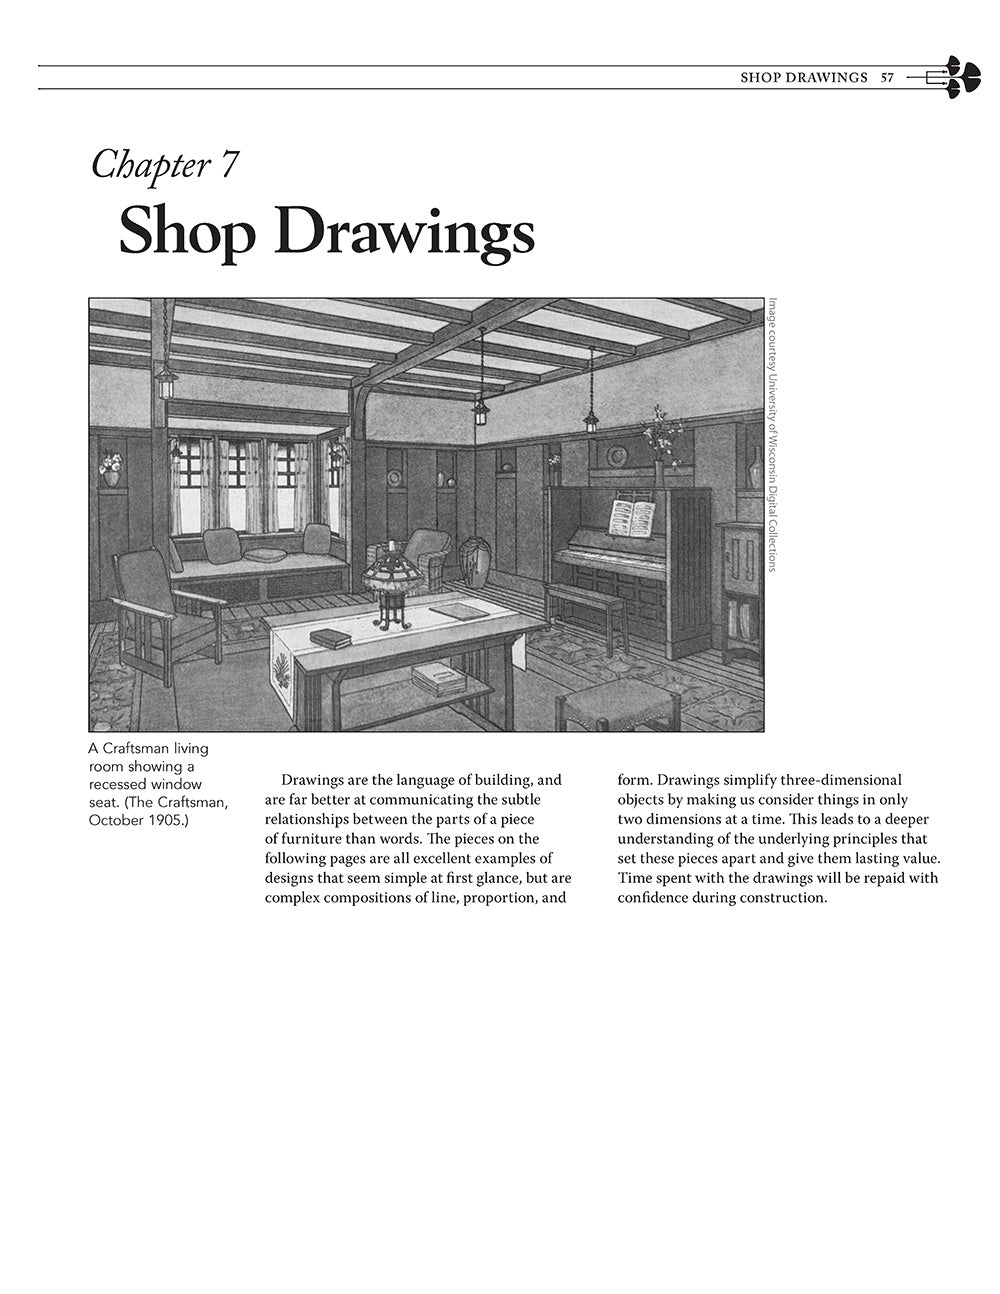 Great Book of Shop Drawings for Craftsman Furniture, Revised & Expanded Second Edition